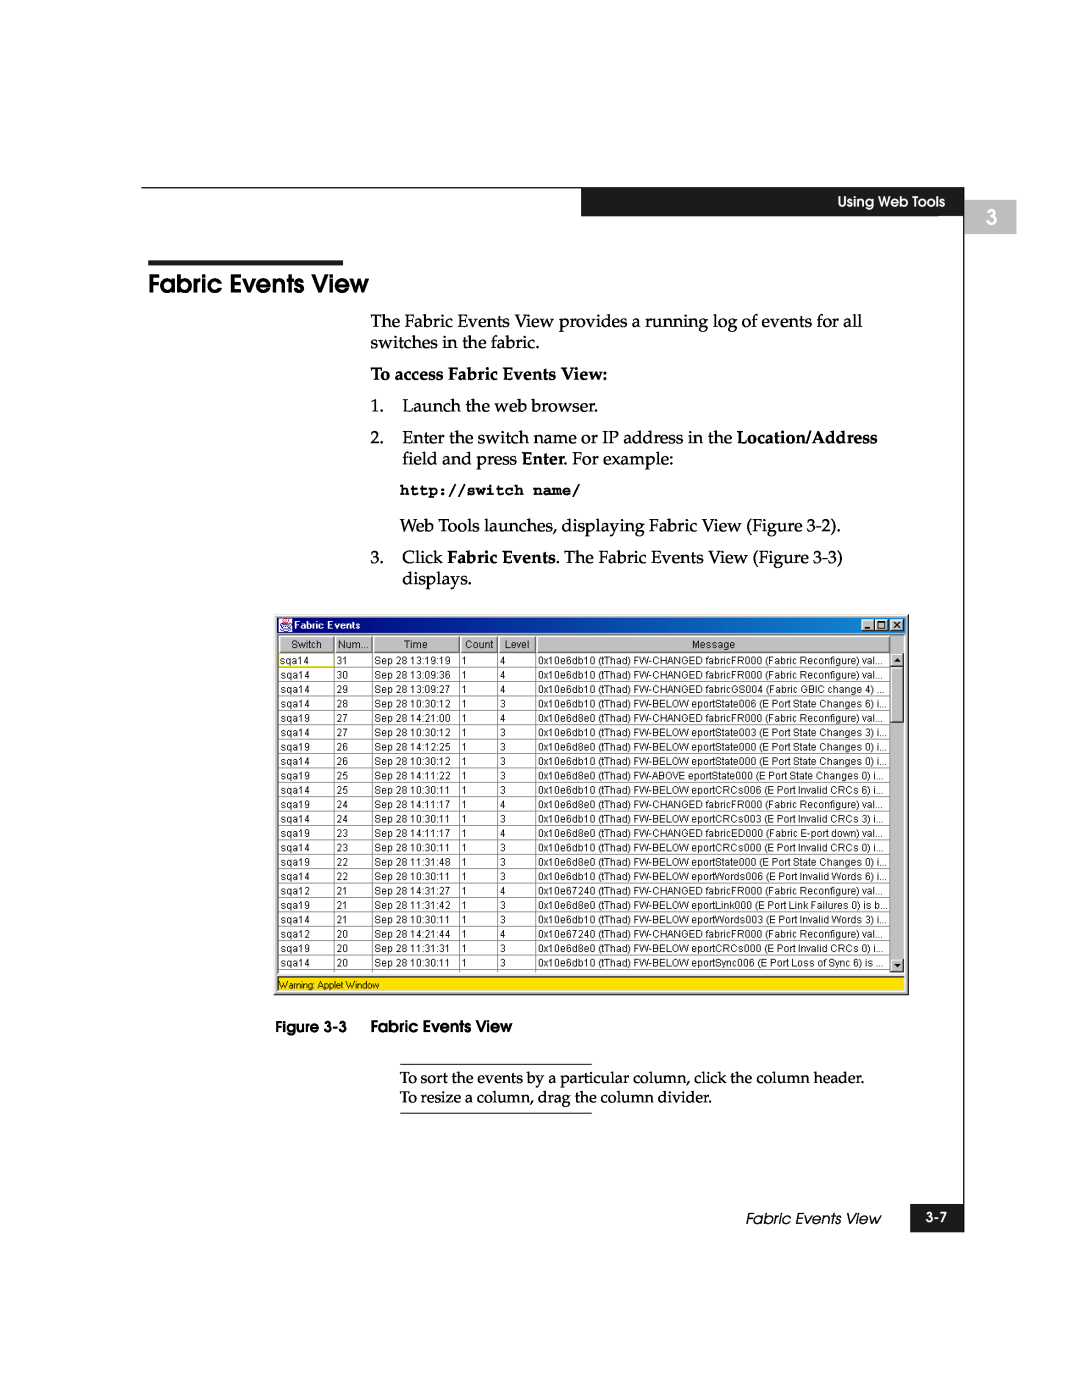 EMC DS-8B manual To access Fabric Events View 